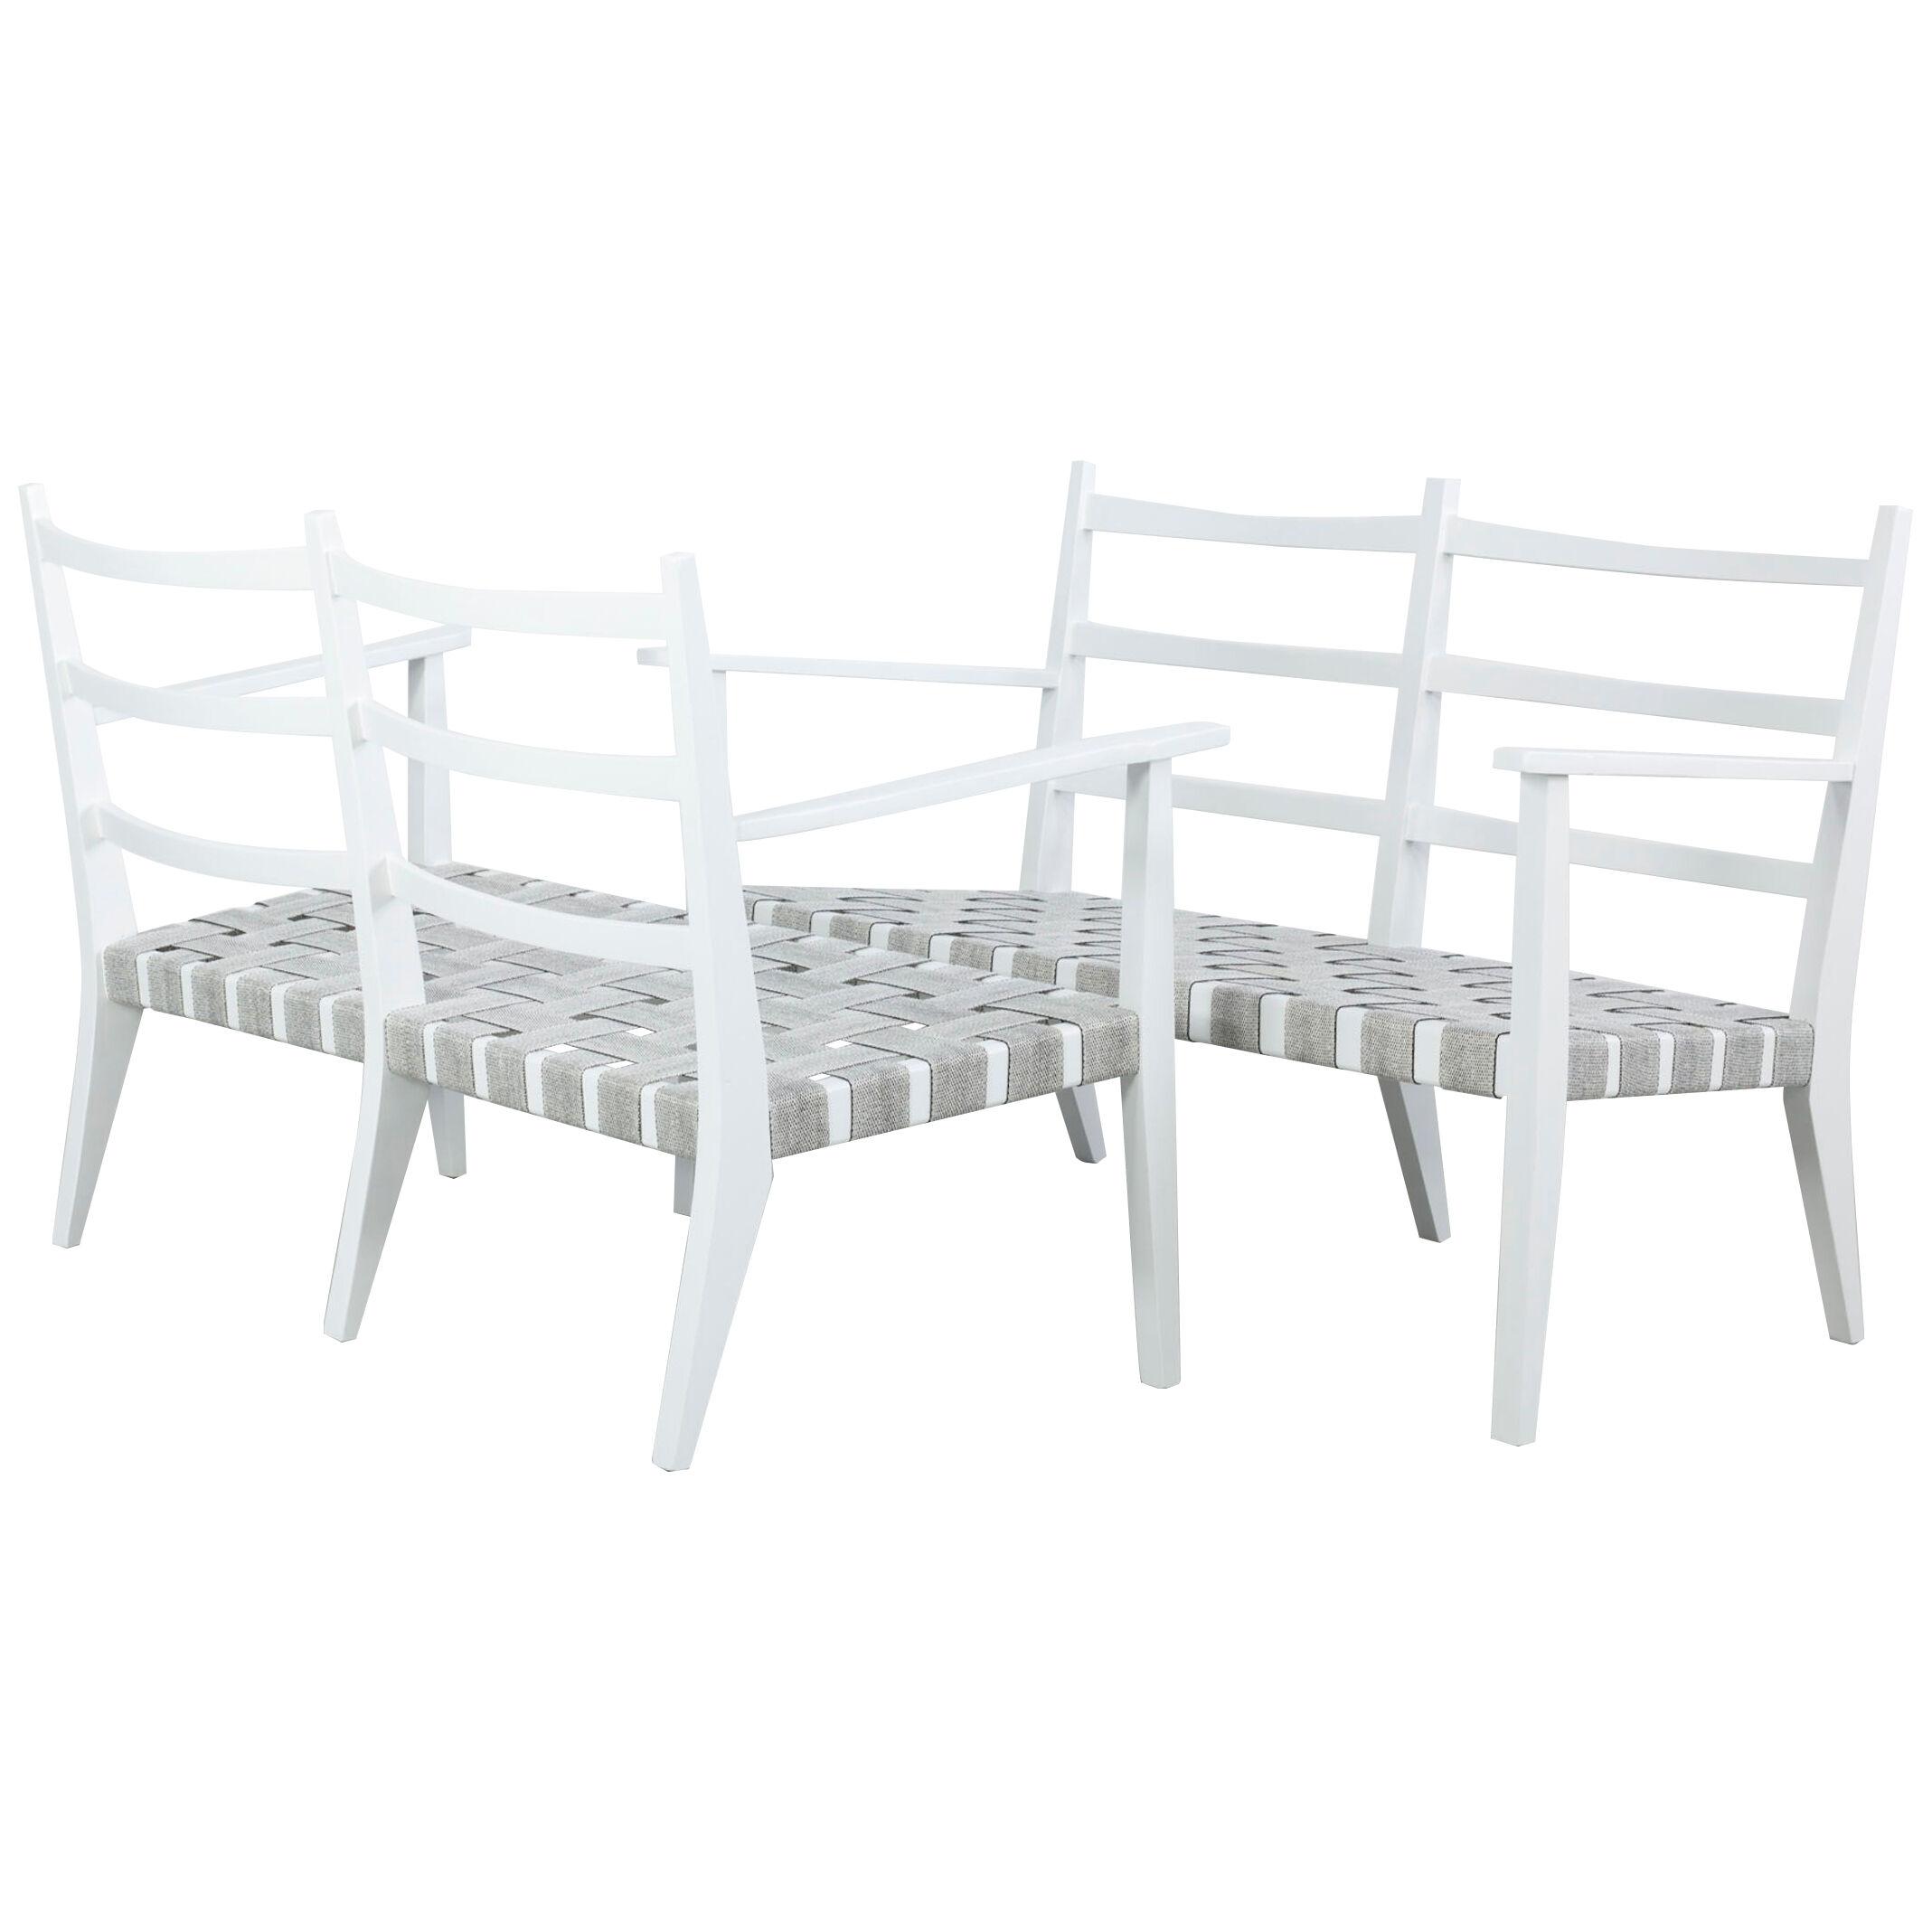 Set of 3 white painted Wooden Benches with 1 Armchair, Italy, 1960s